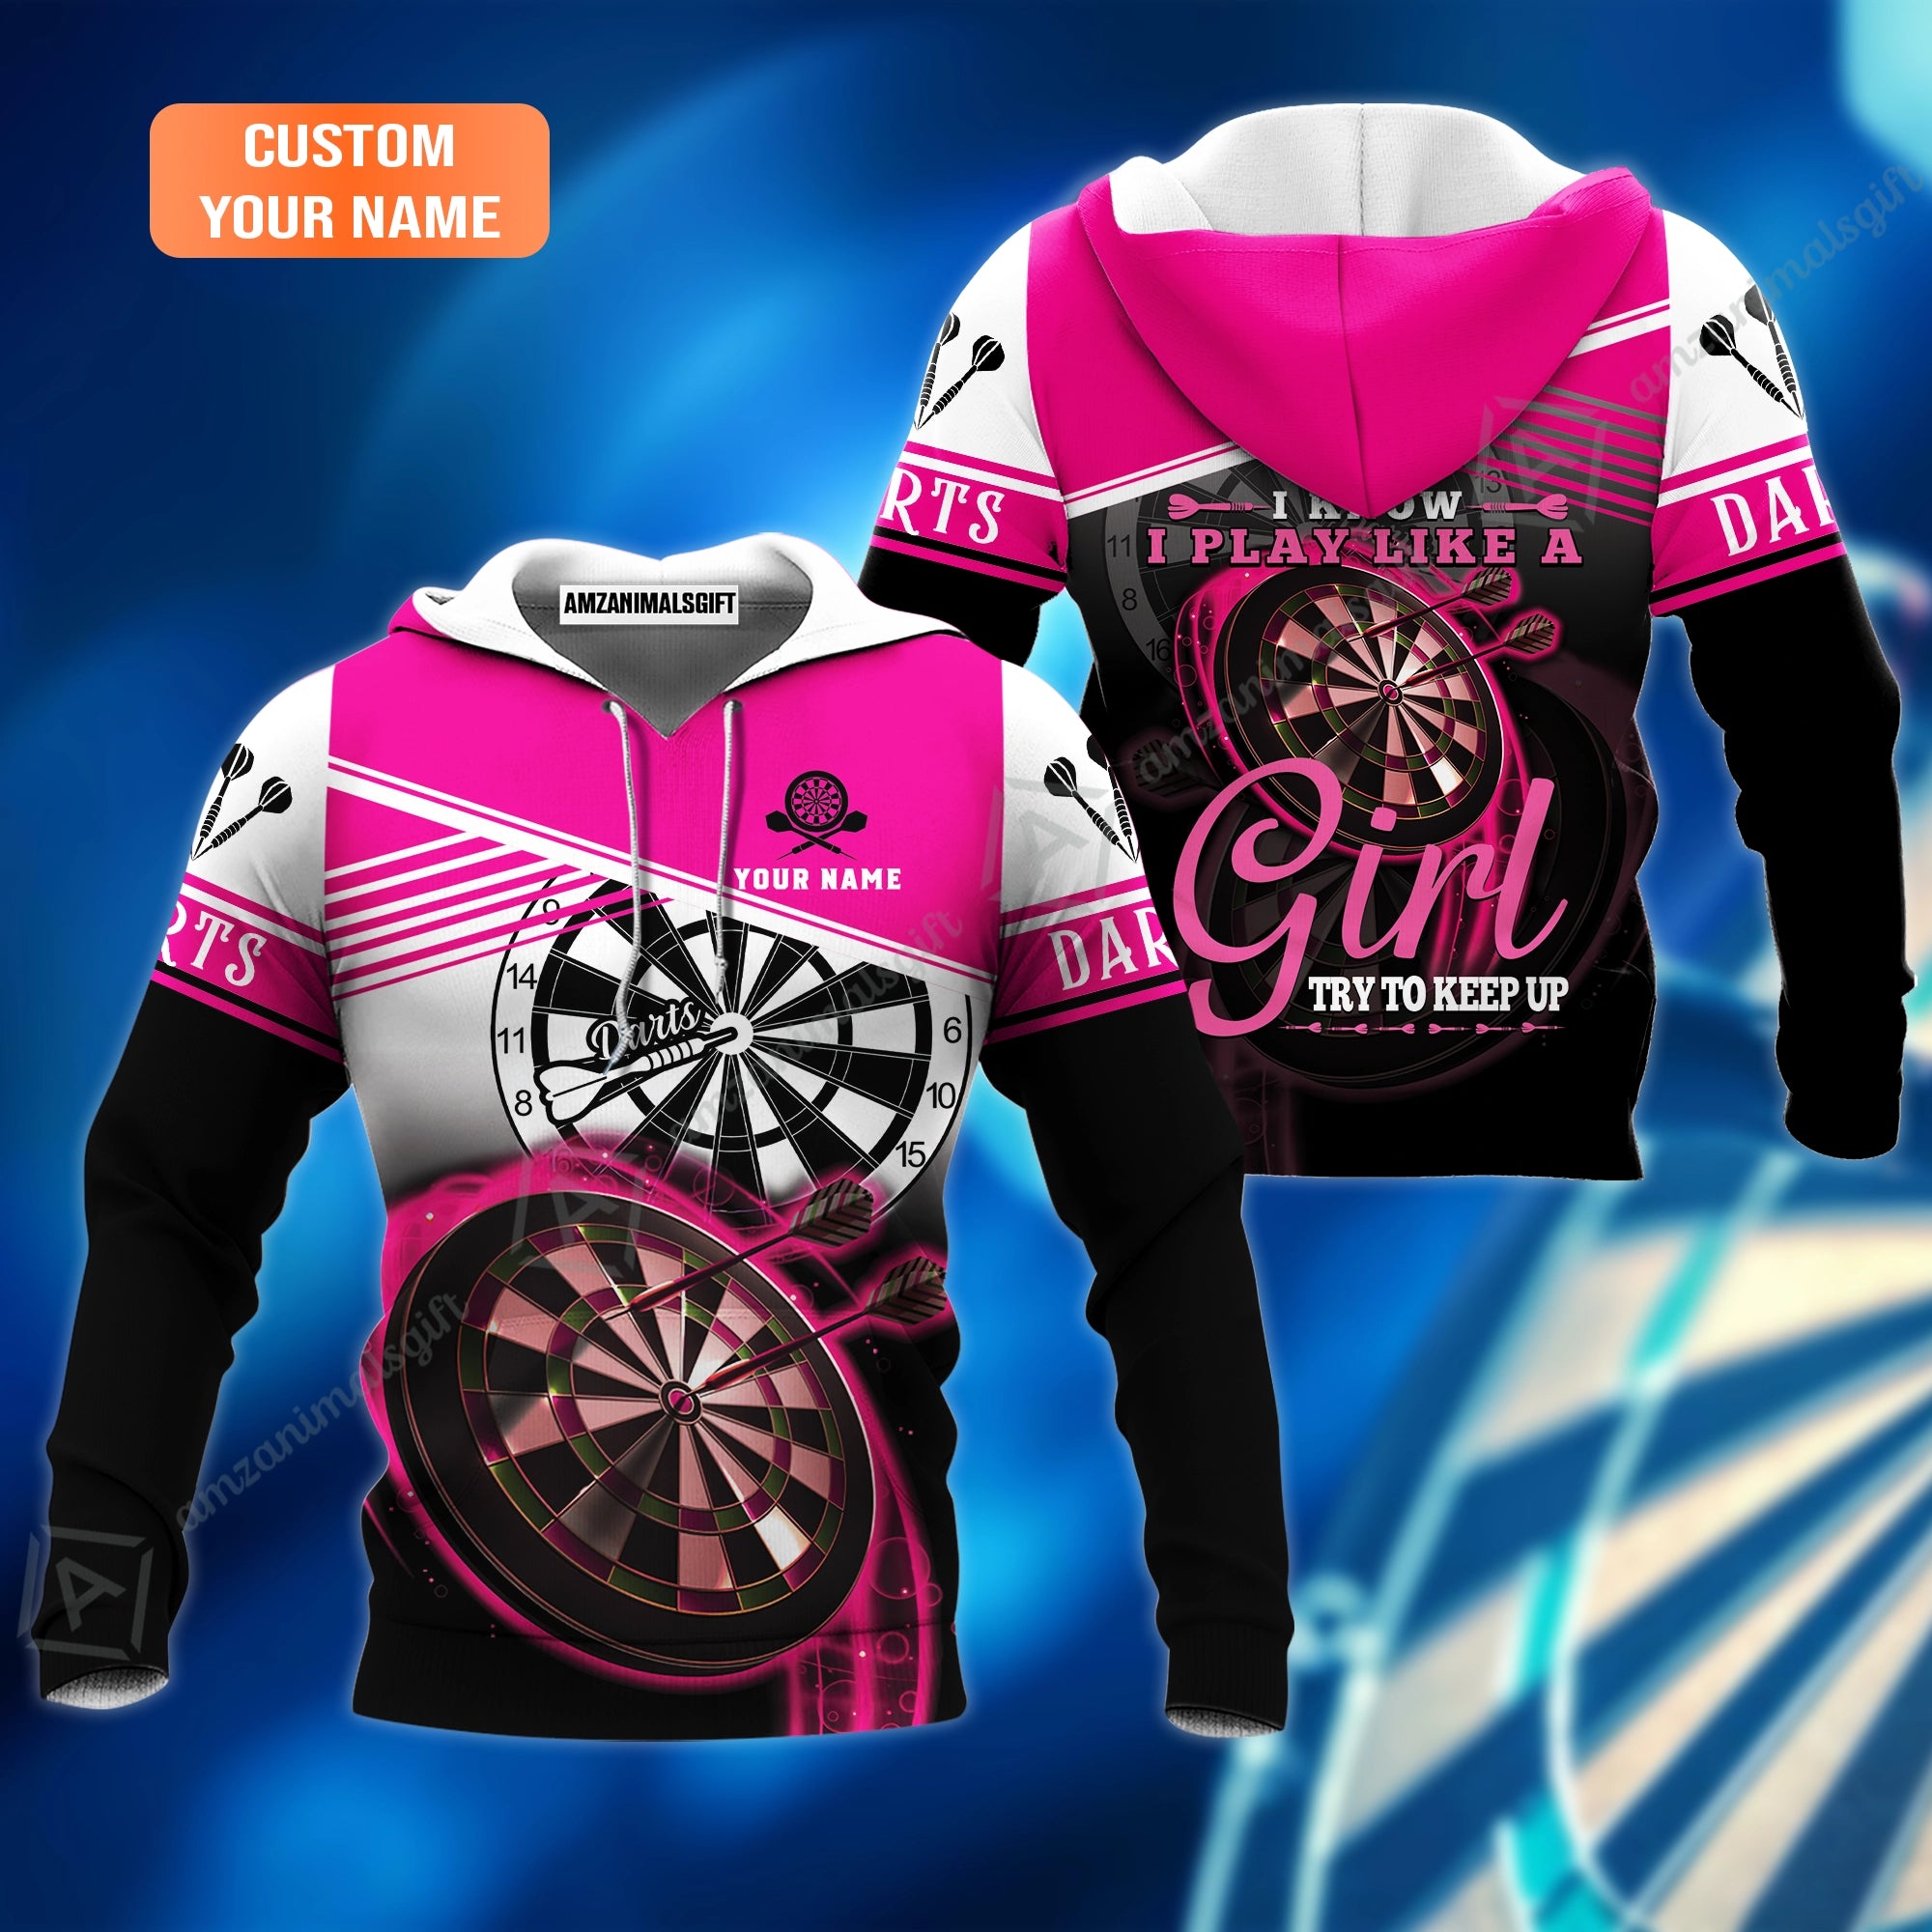 Personalized Darts Hoodie, Darts Pink Color Hoodie I Know I Play Like A Girl Try To Keep Up, Outfits For Darts Players, Darts Team